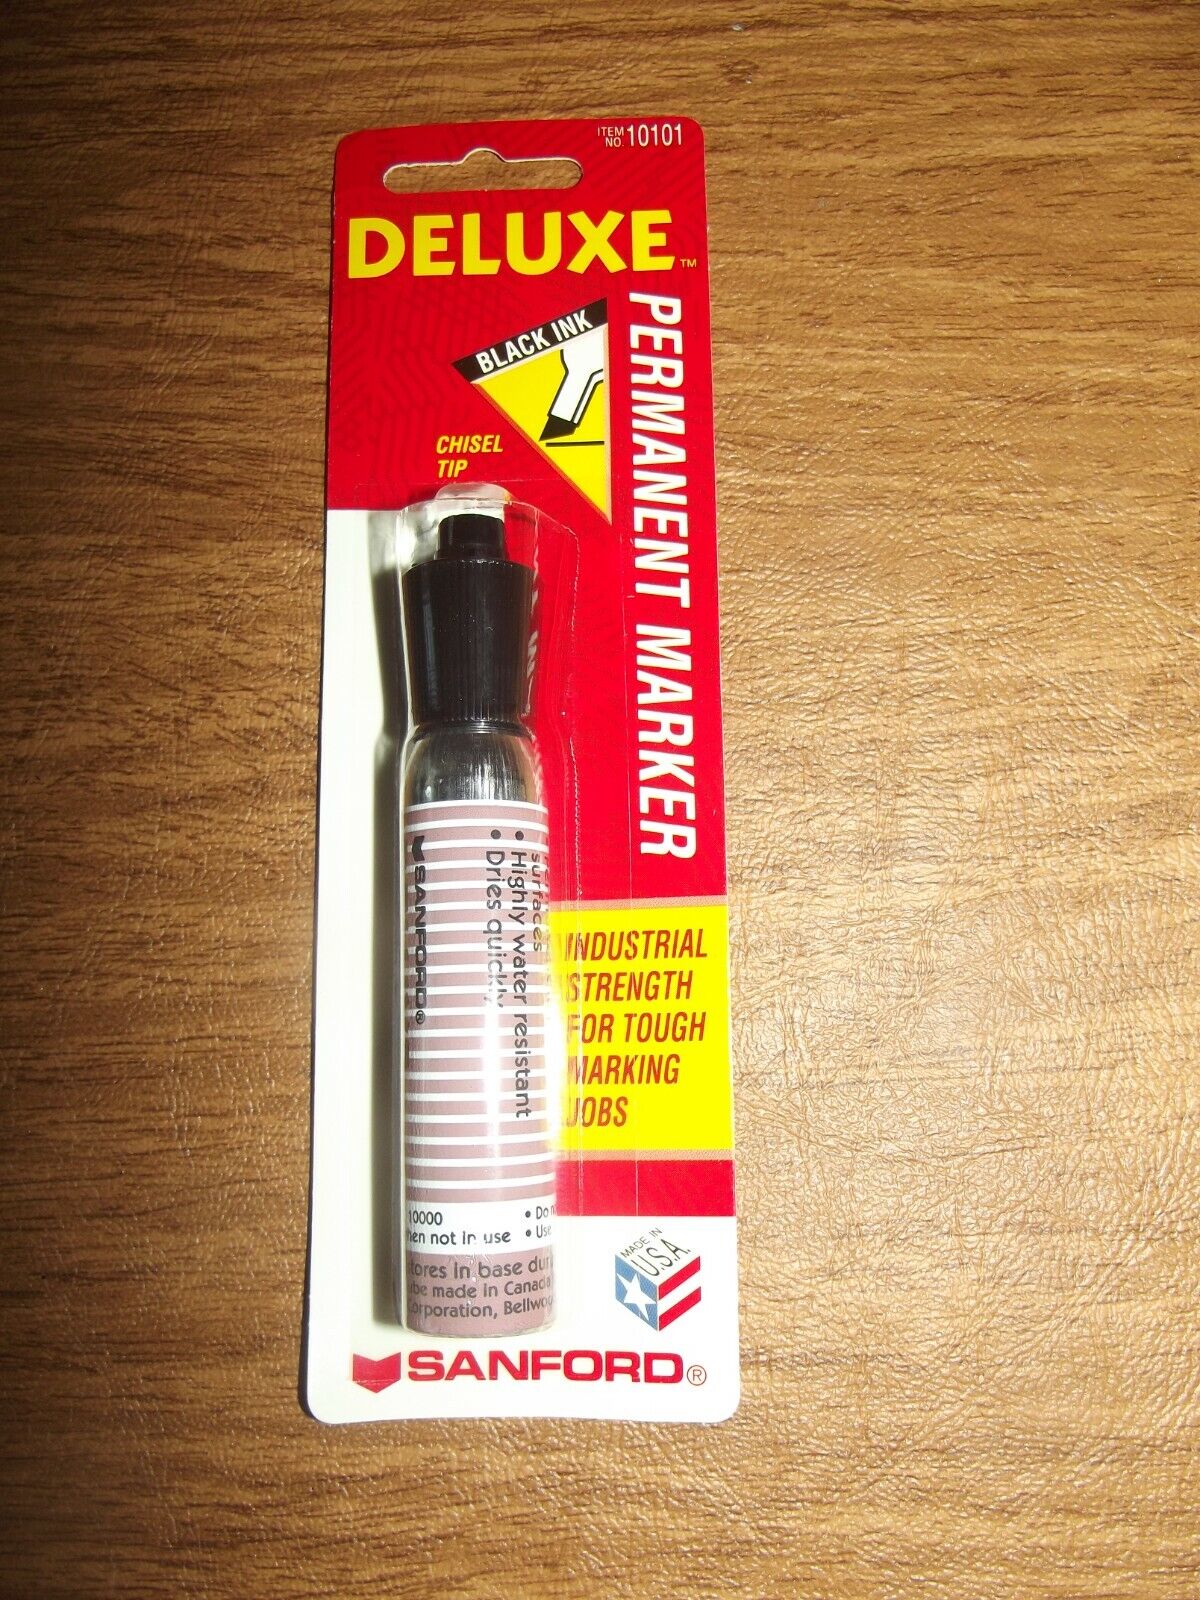 Vtg NOS Sanford Deluxe Black Permanent Marker Collectible Free S/H